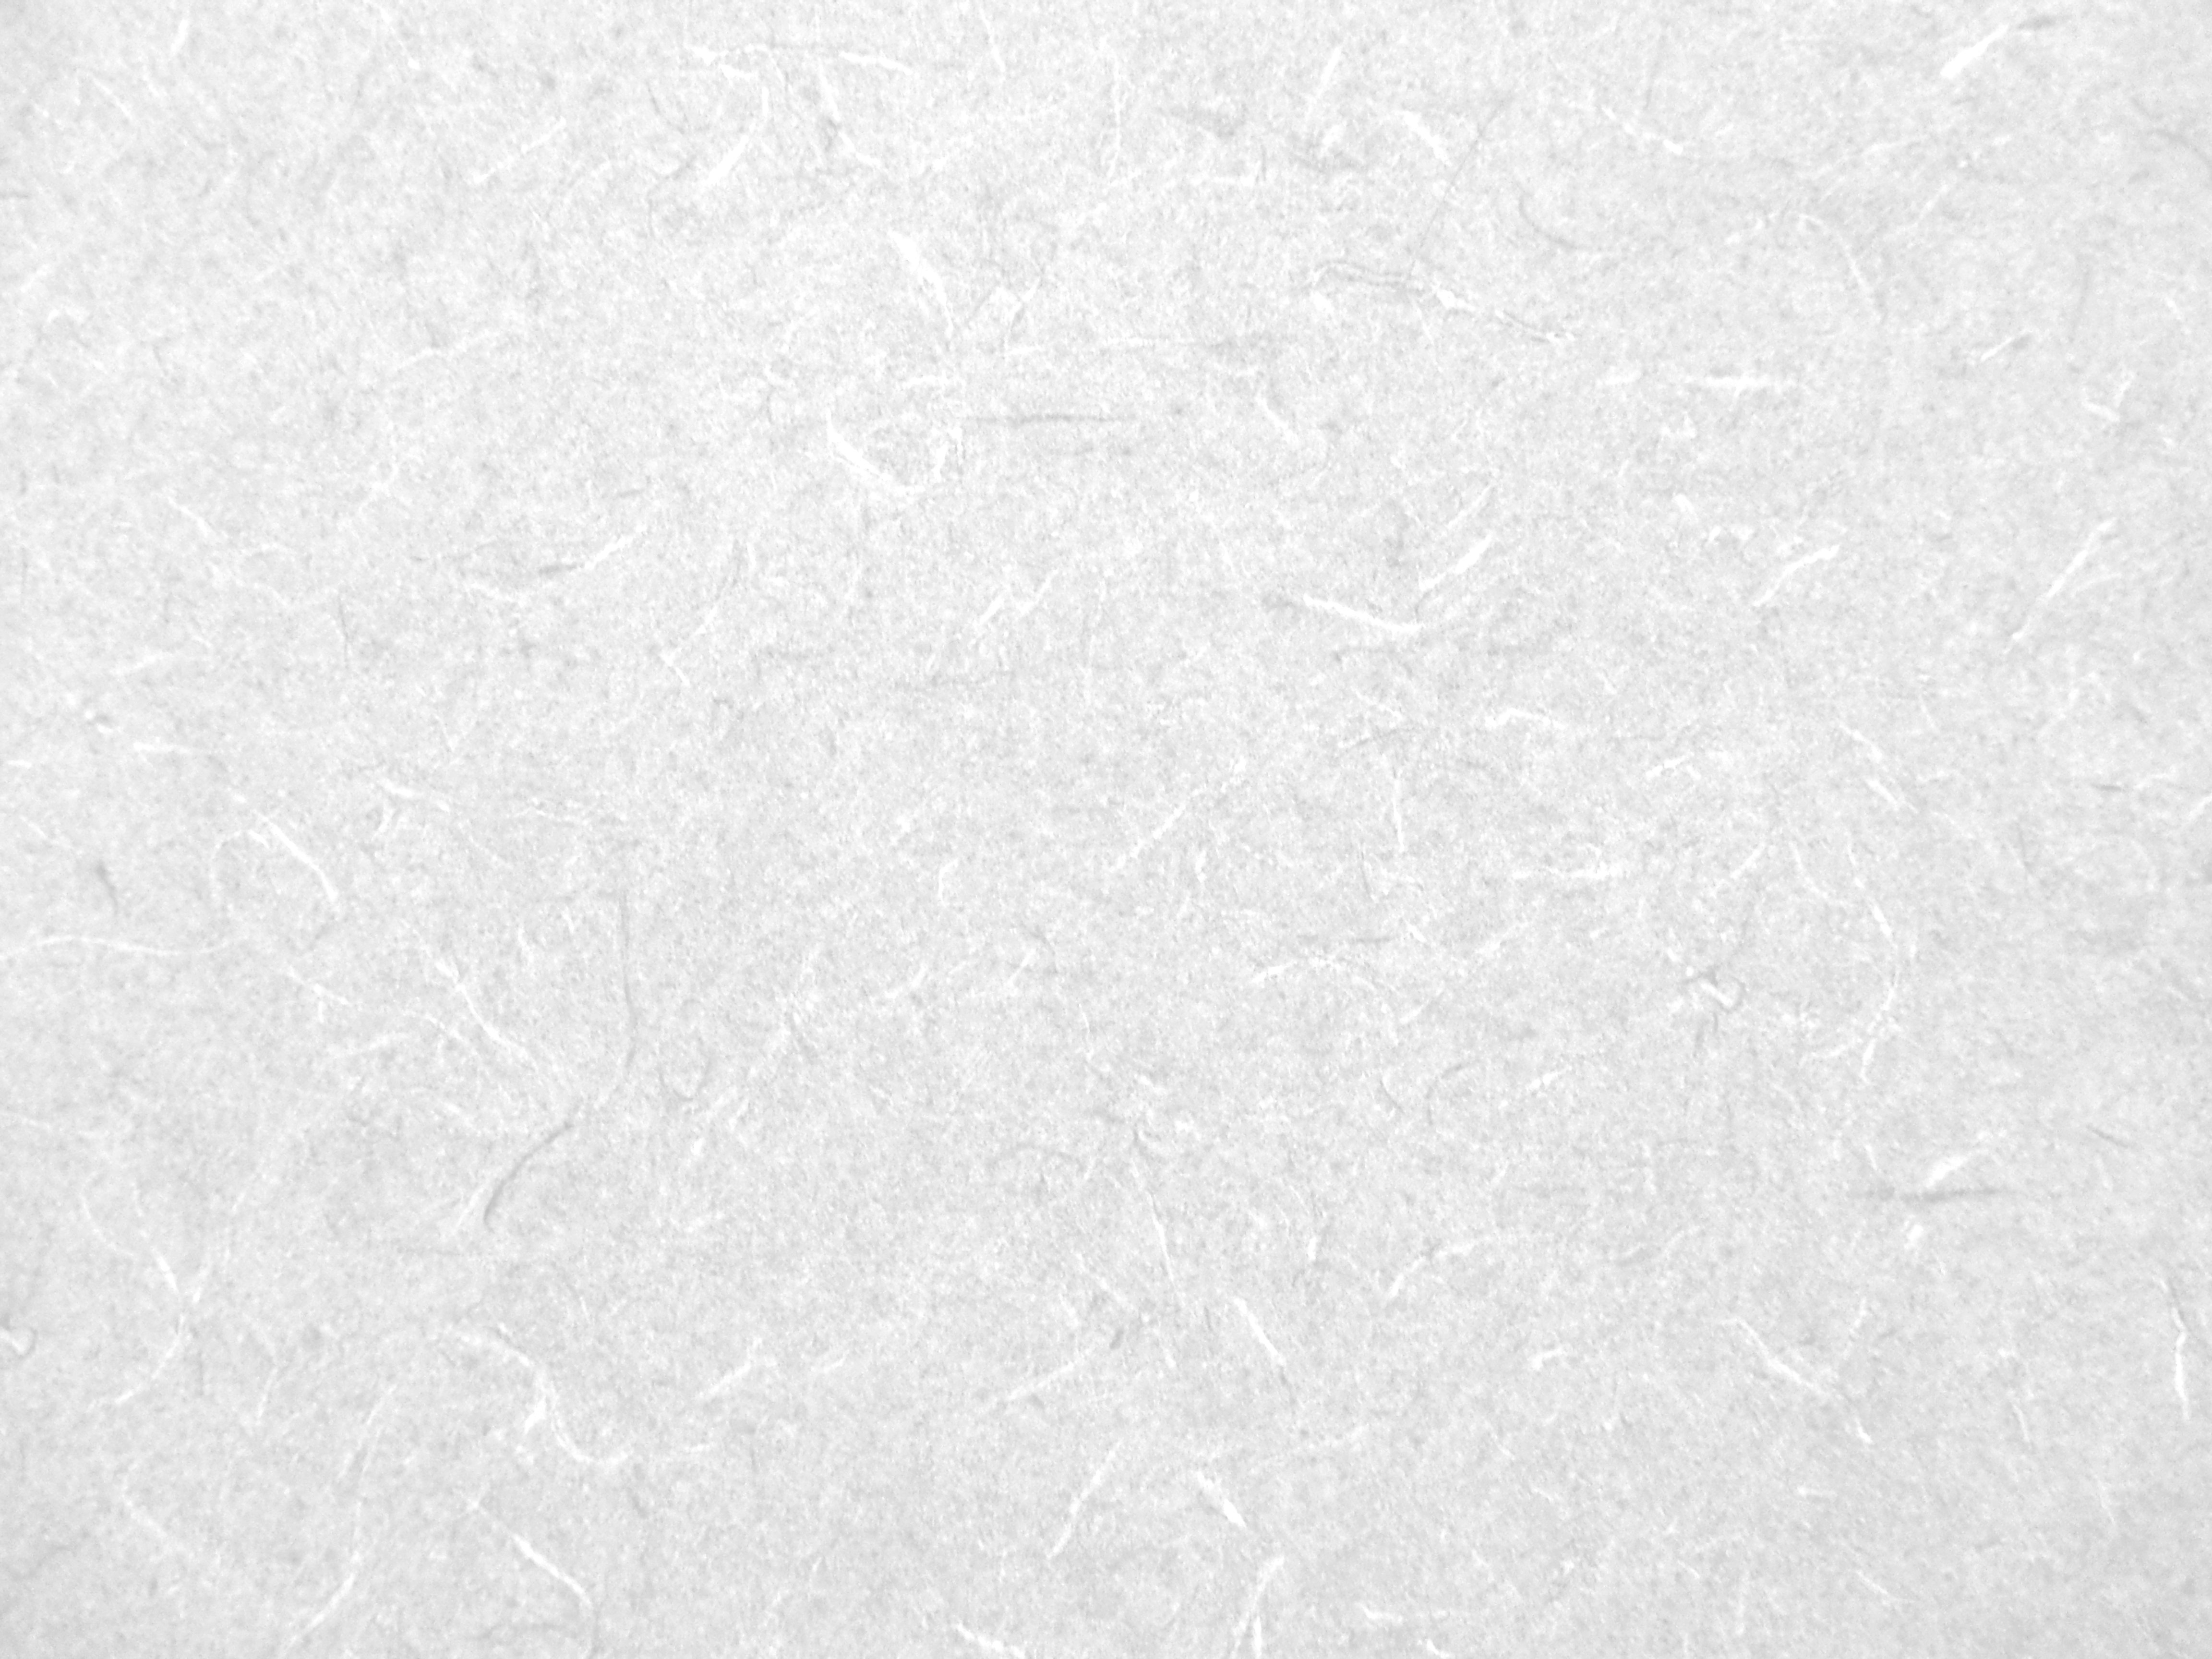 White Cardboard Texture Images Crazy Gallery